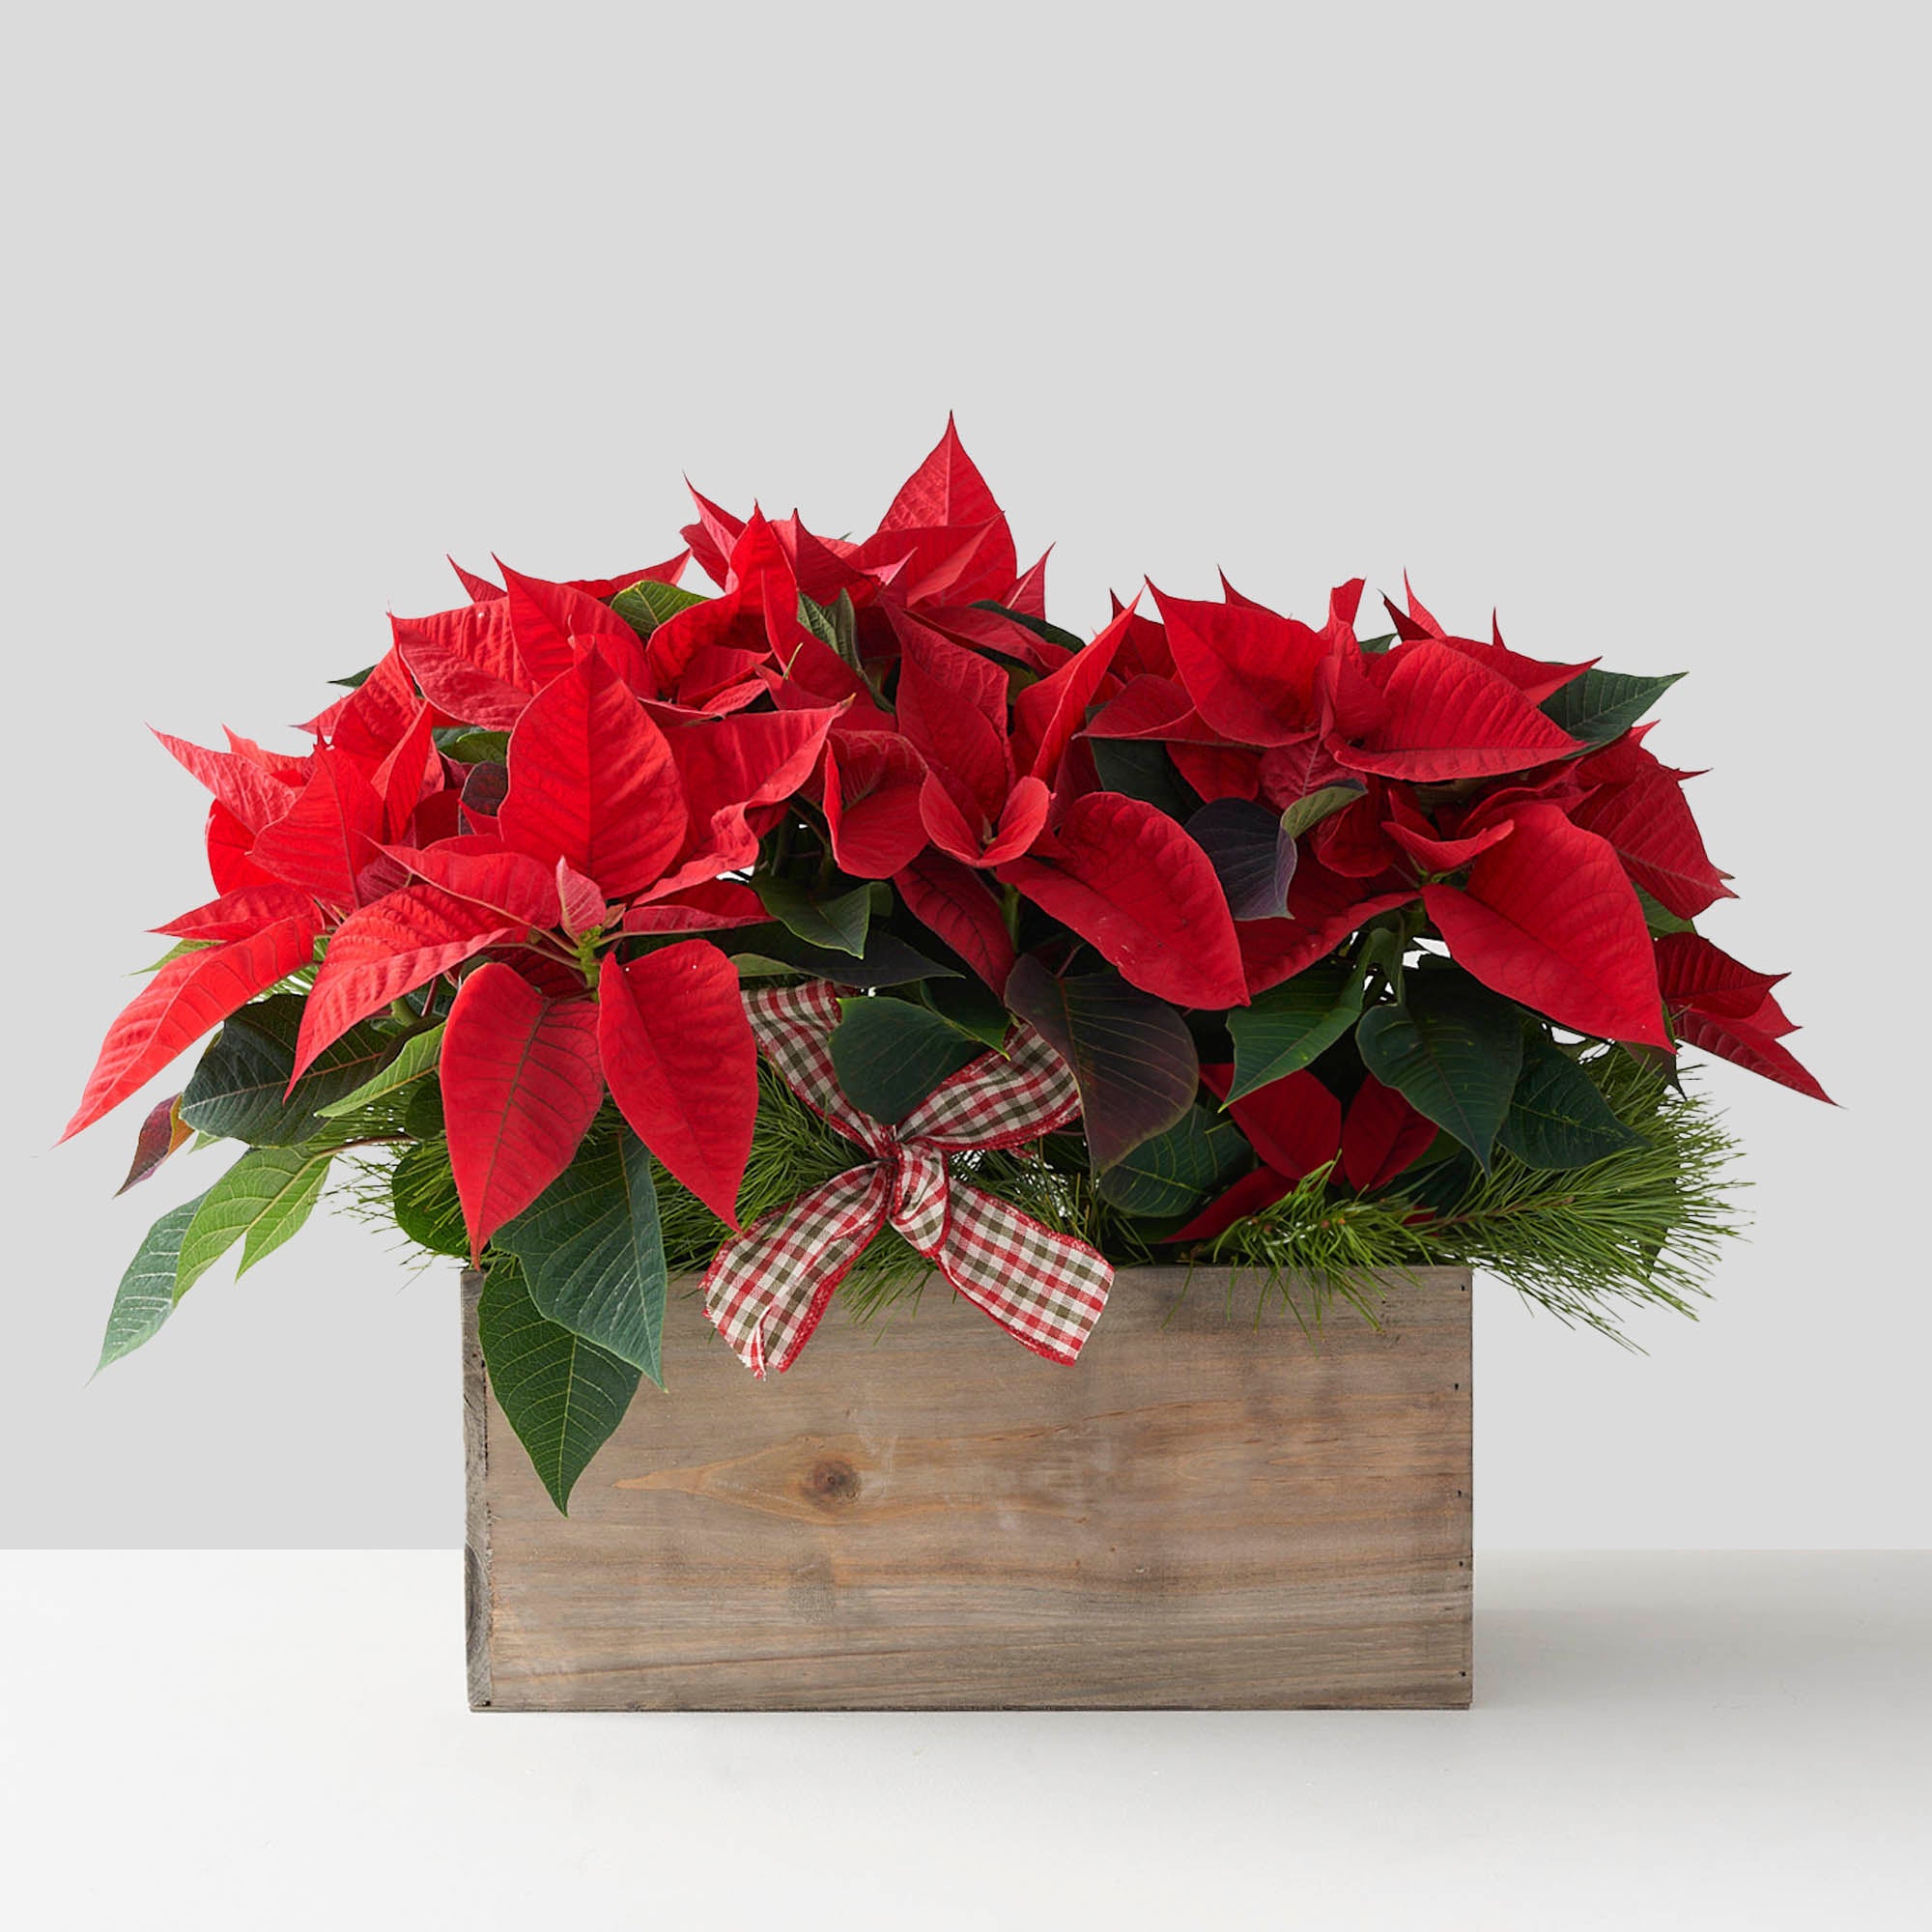 Large red poinsettia bland in wooden box with pine boughs and red and green plaid ribbon.